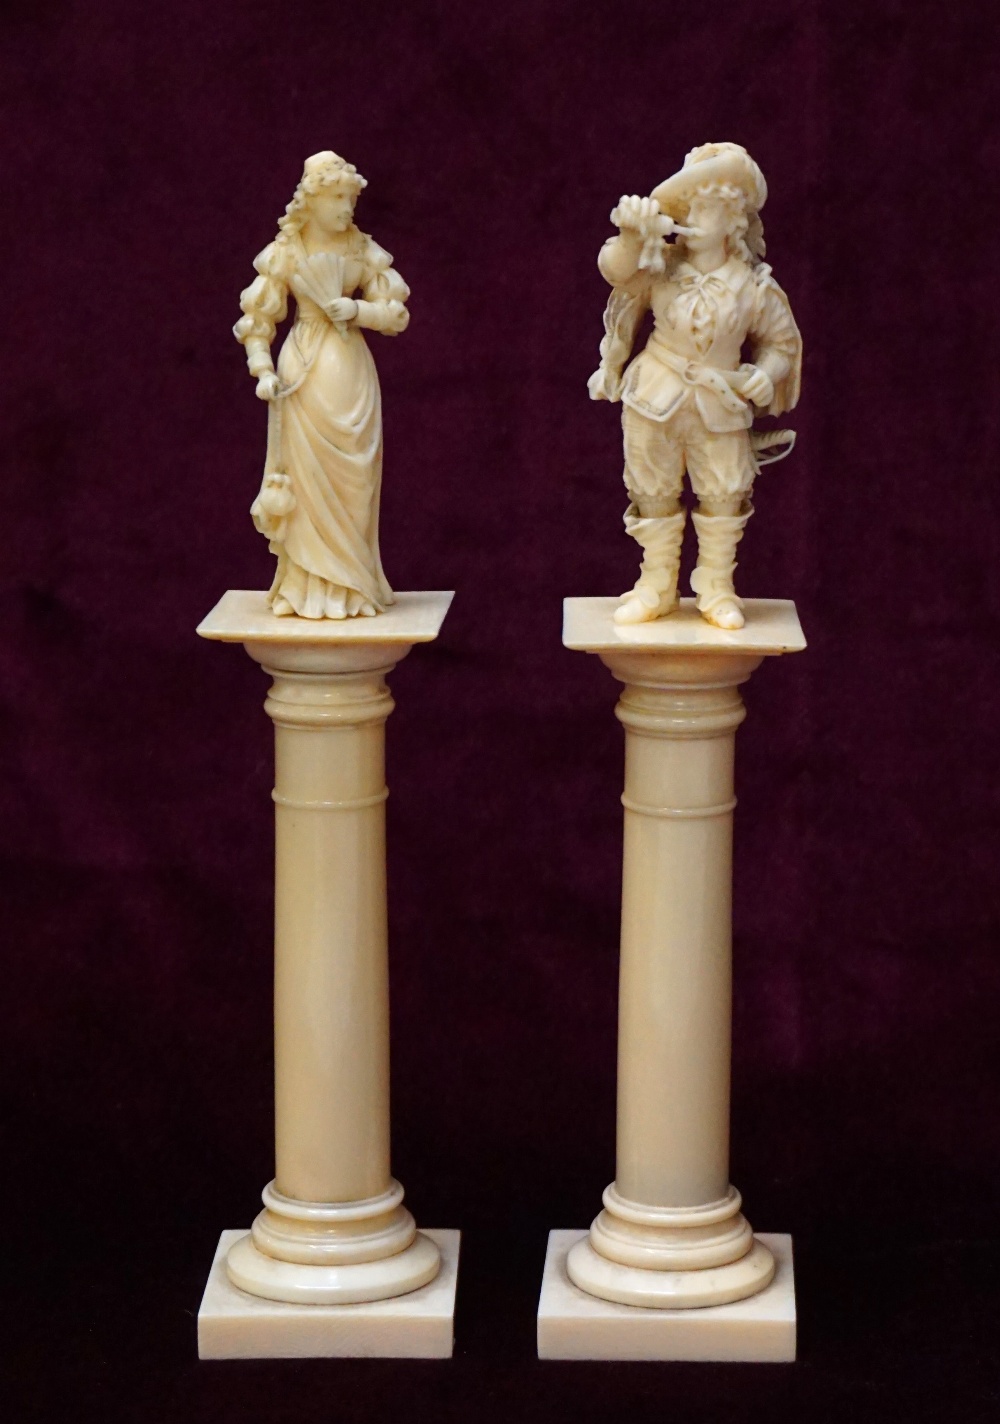 PAIR OF 19th CENTURY CONTINENTAL CARVED IVORY FIGURES depicting a lady and gentleman in 17th